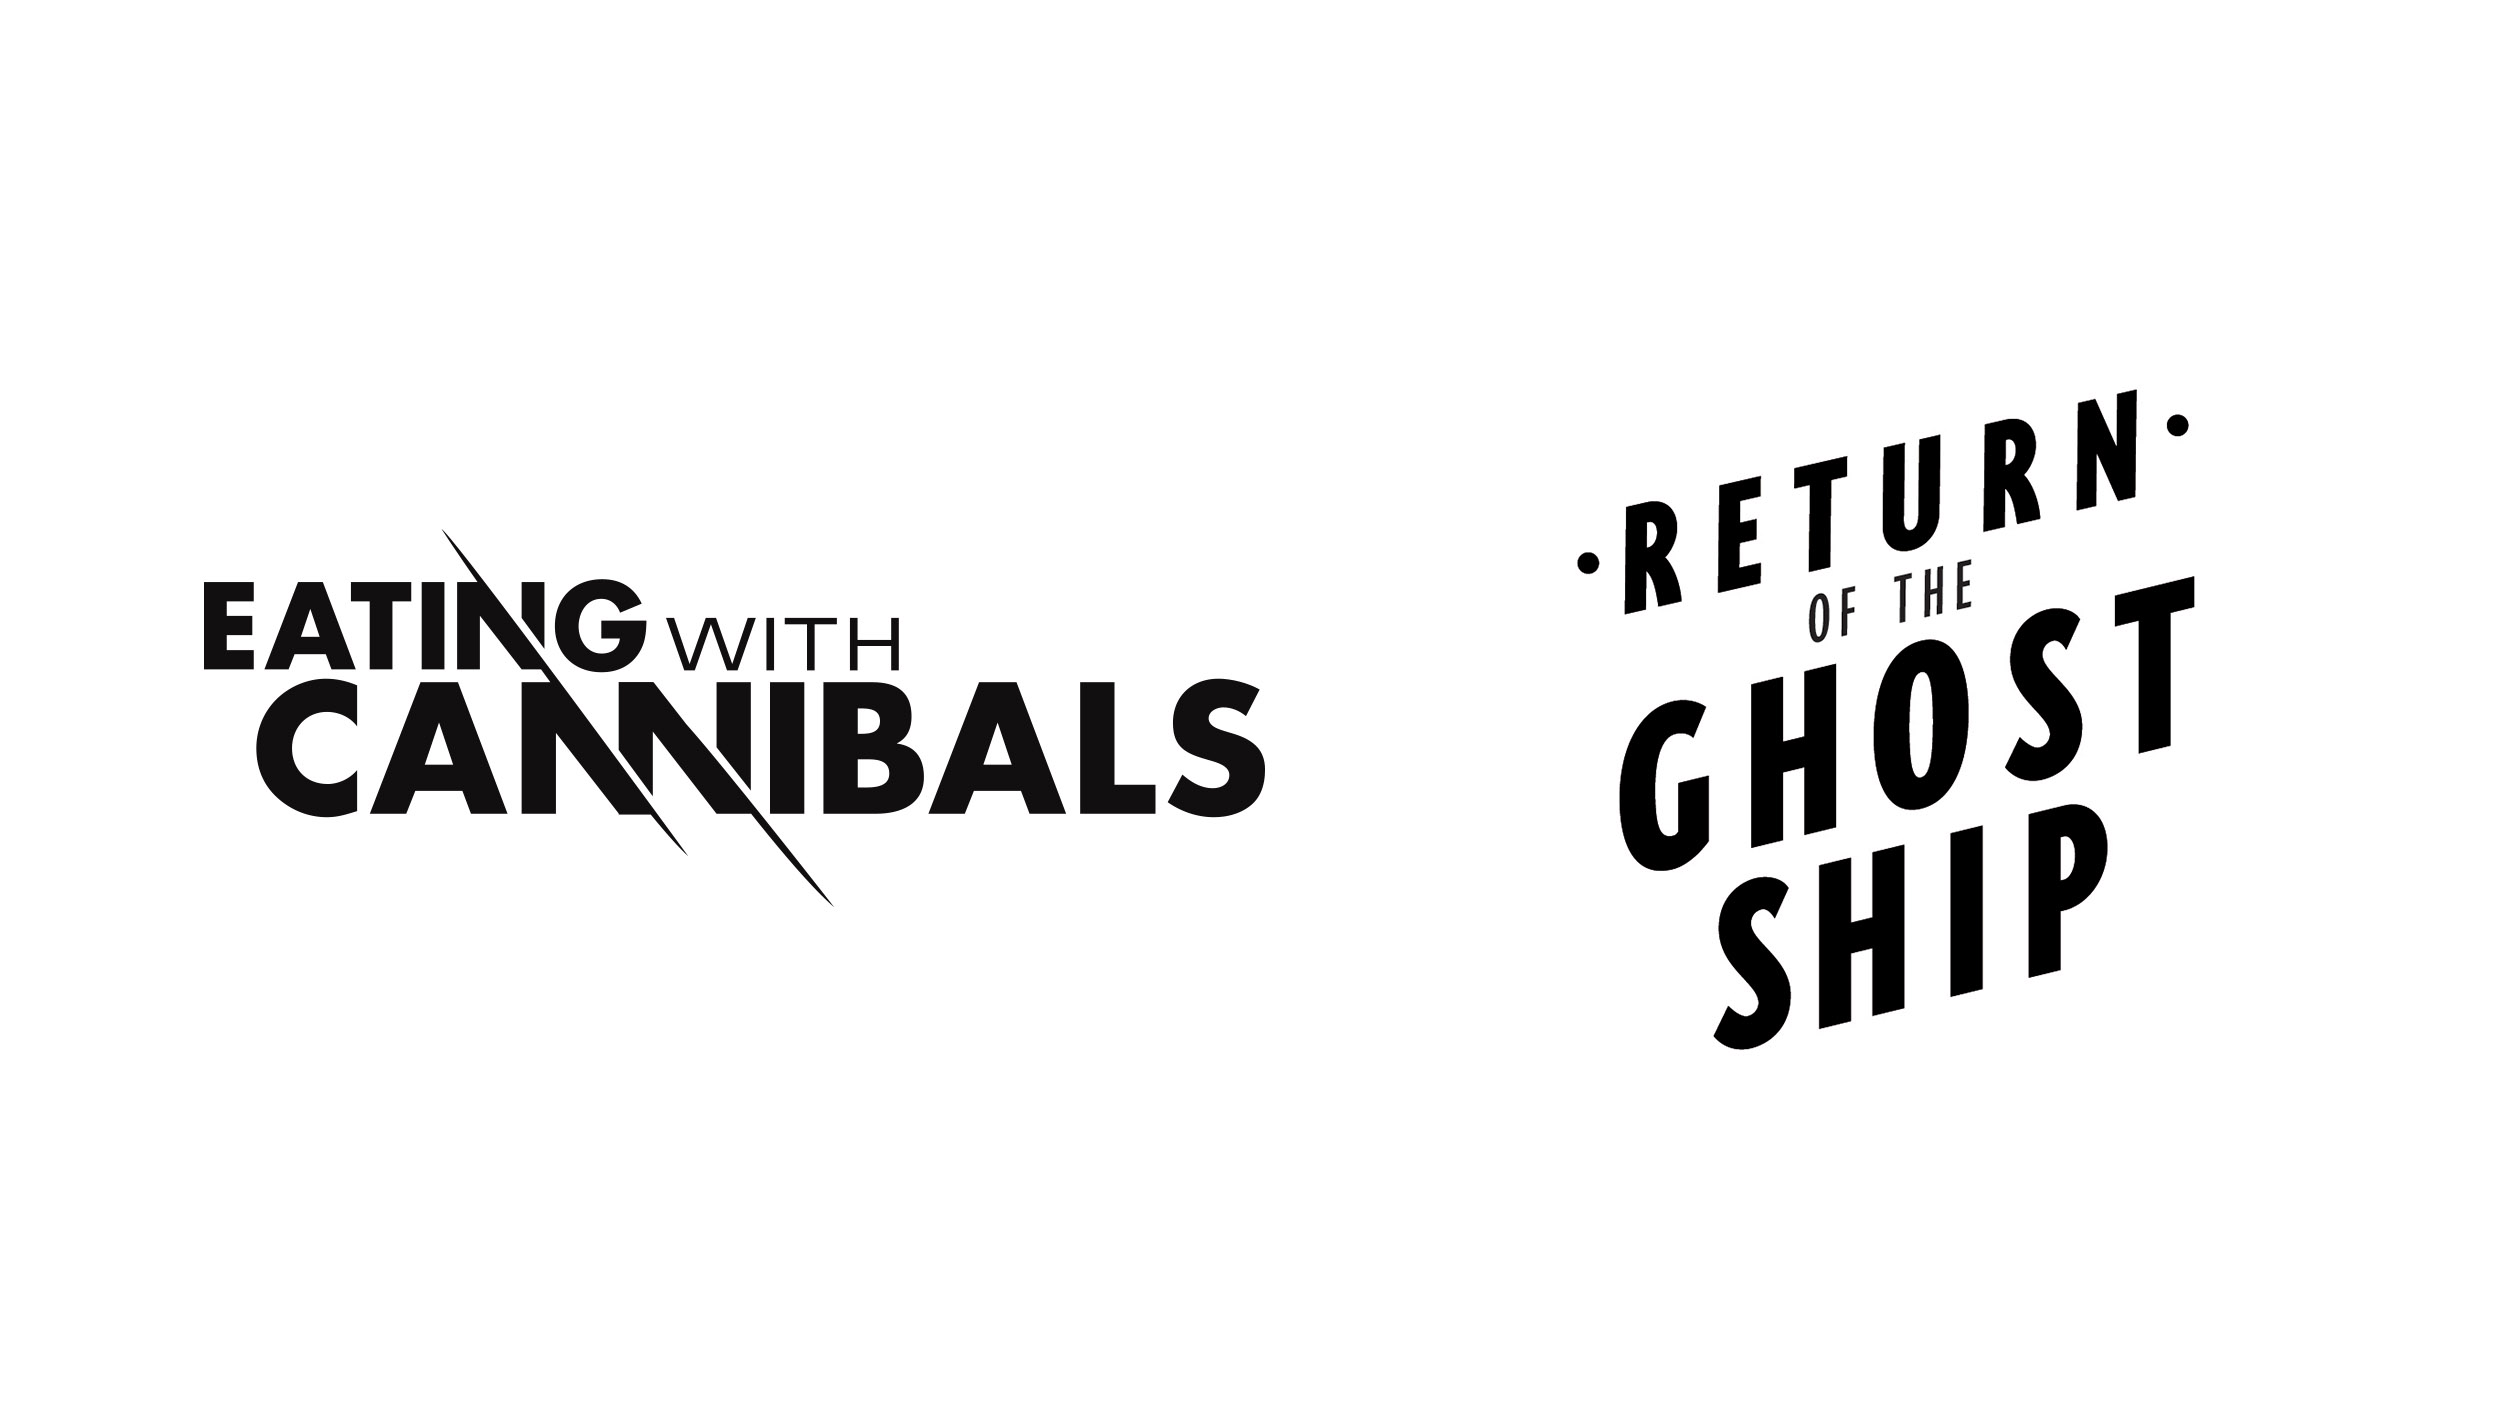 Logo and type treatments for two shows on the Nat Geo Channel, Eating with Cannibals and Return of the Ghost Ship.